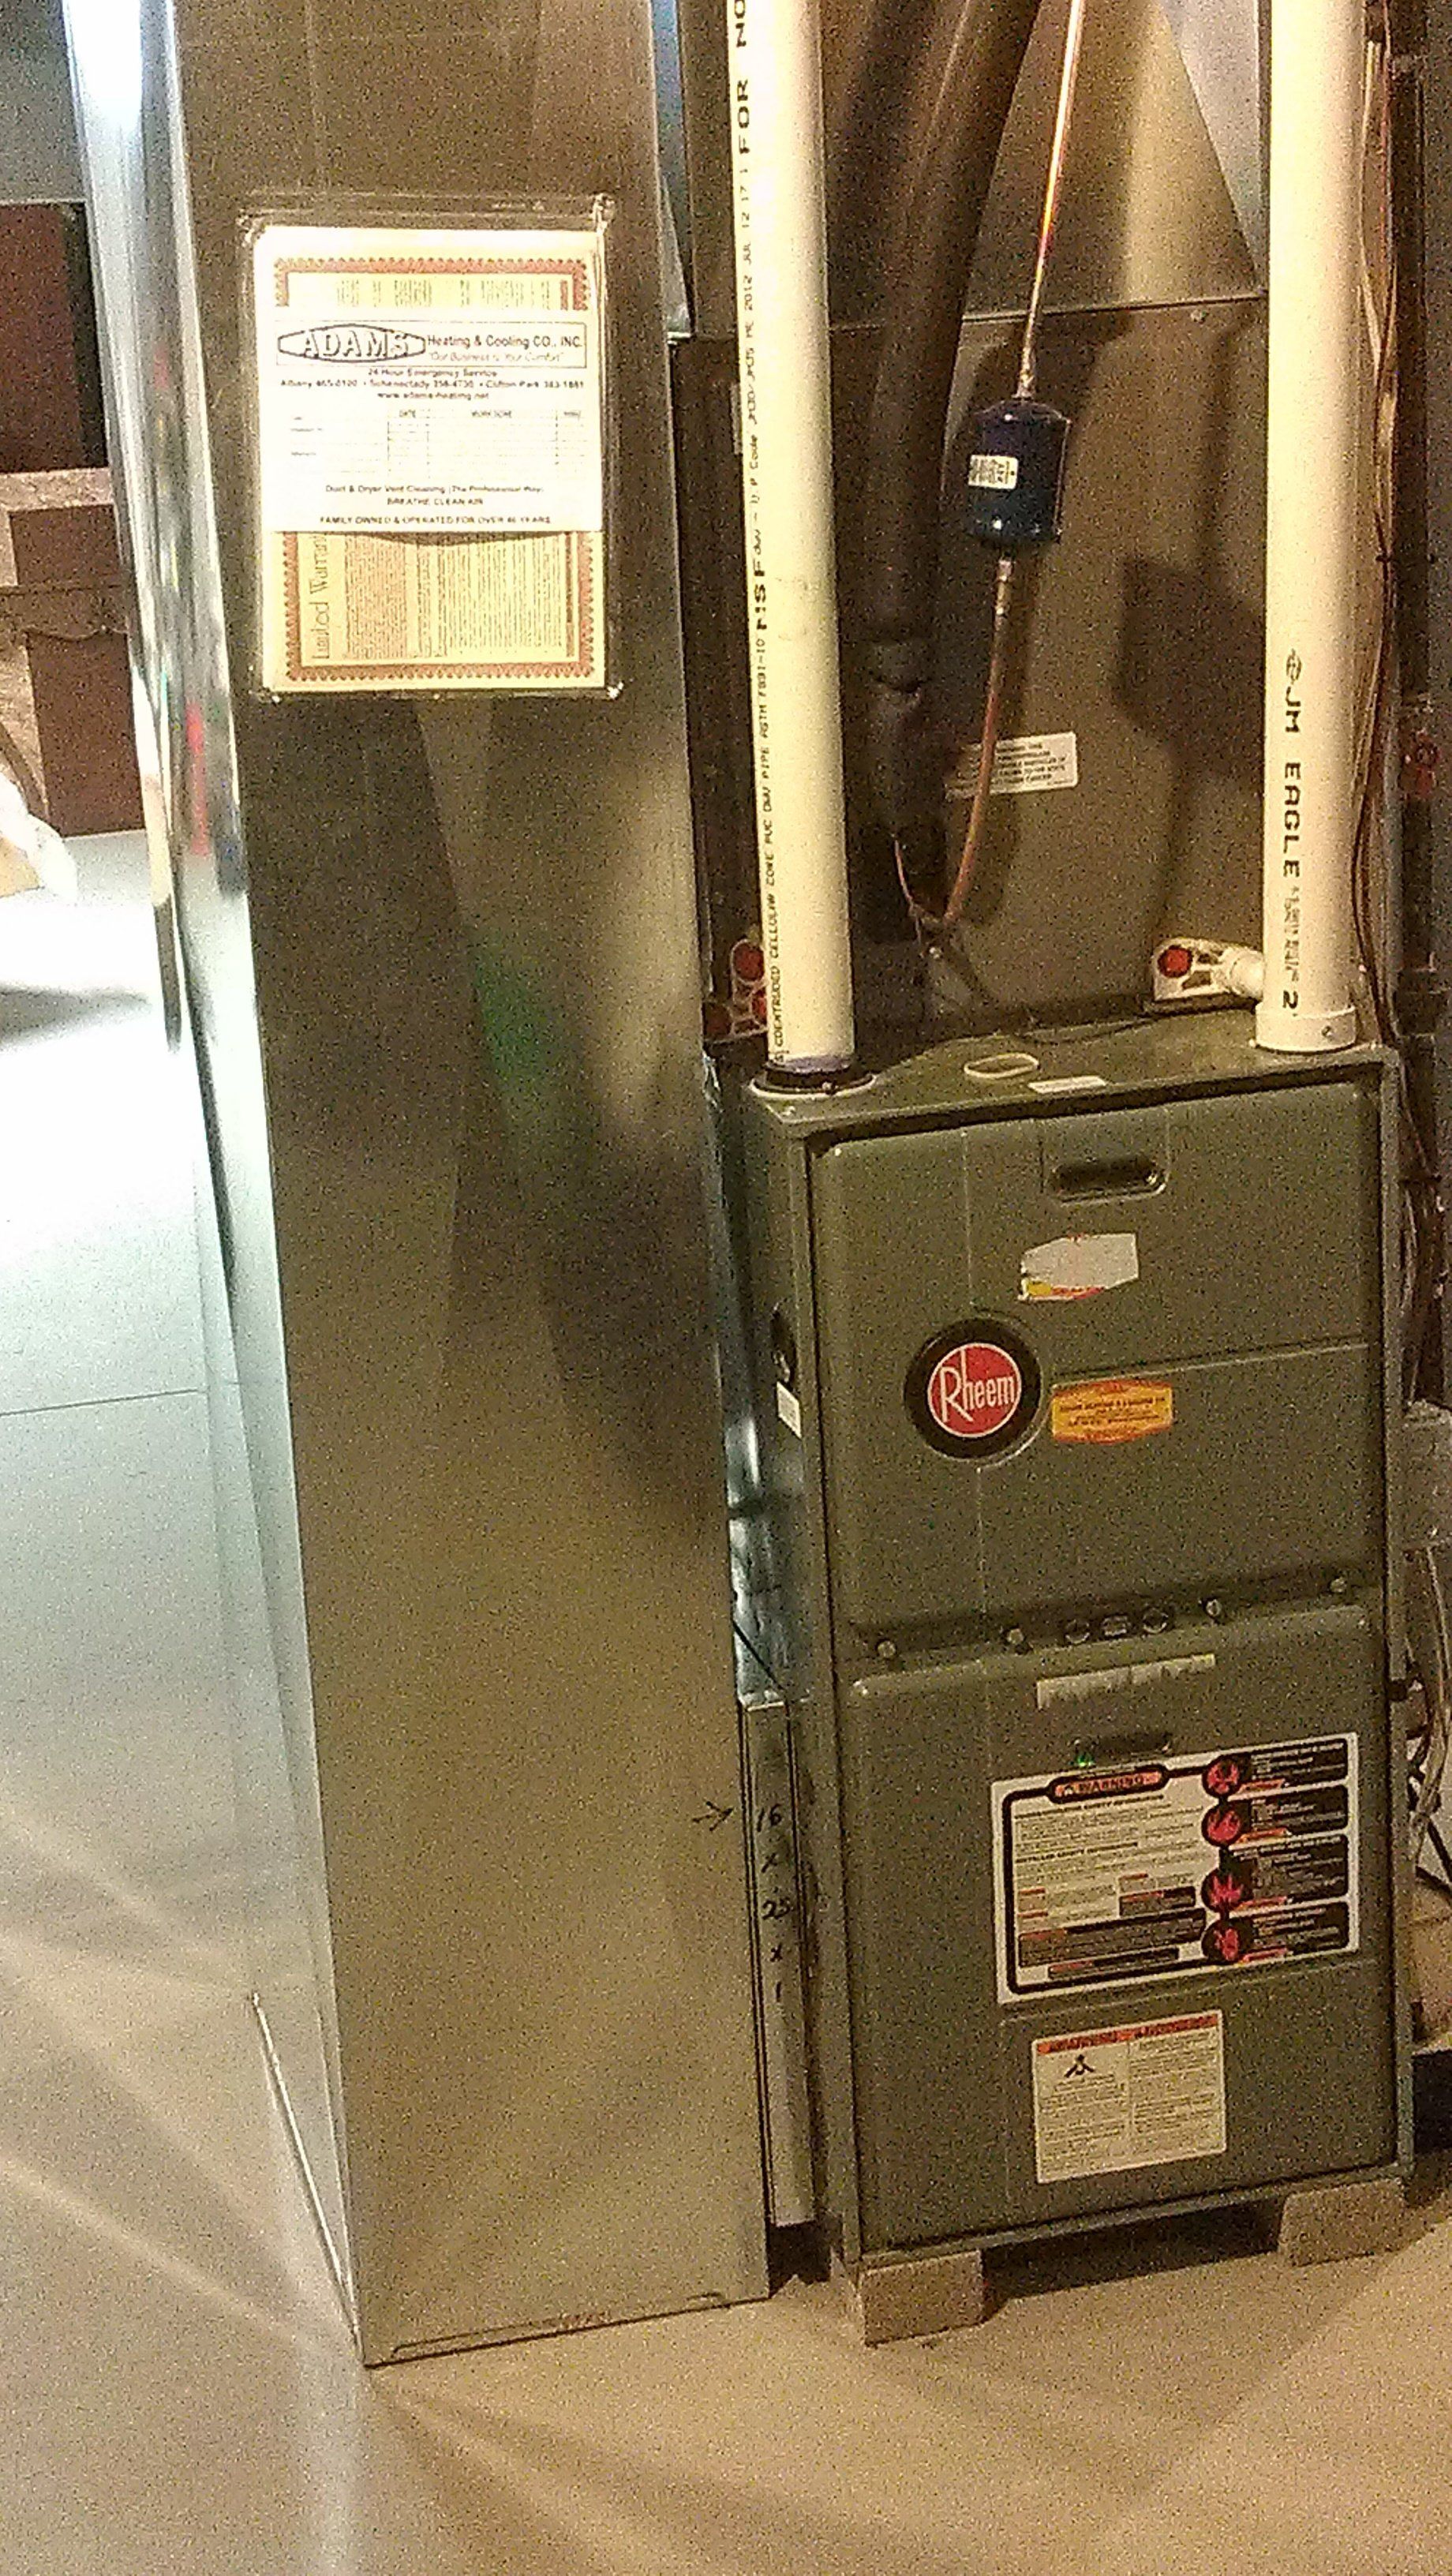 A Rheem hot air furnace installed by Adams Heating & Cooling